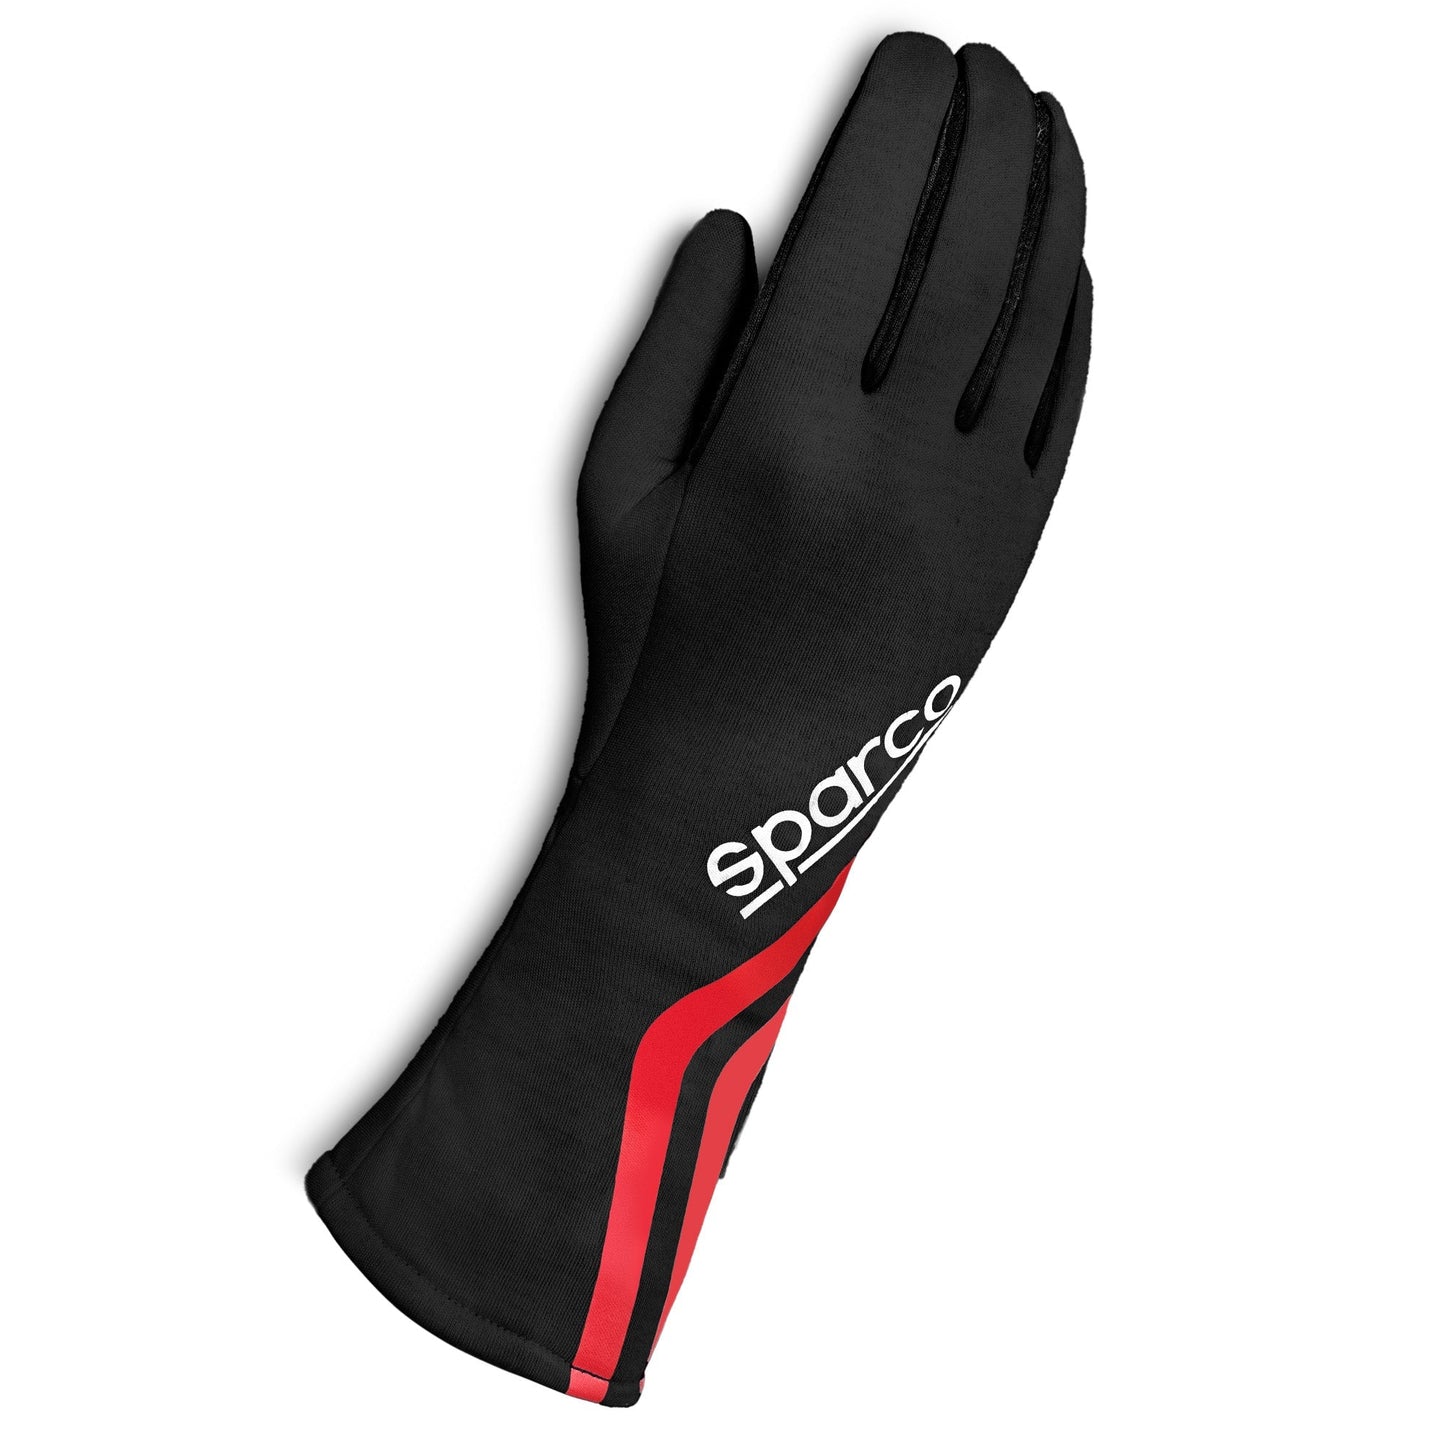 Sparco Land Classic Racing Gloves - 2021 Model